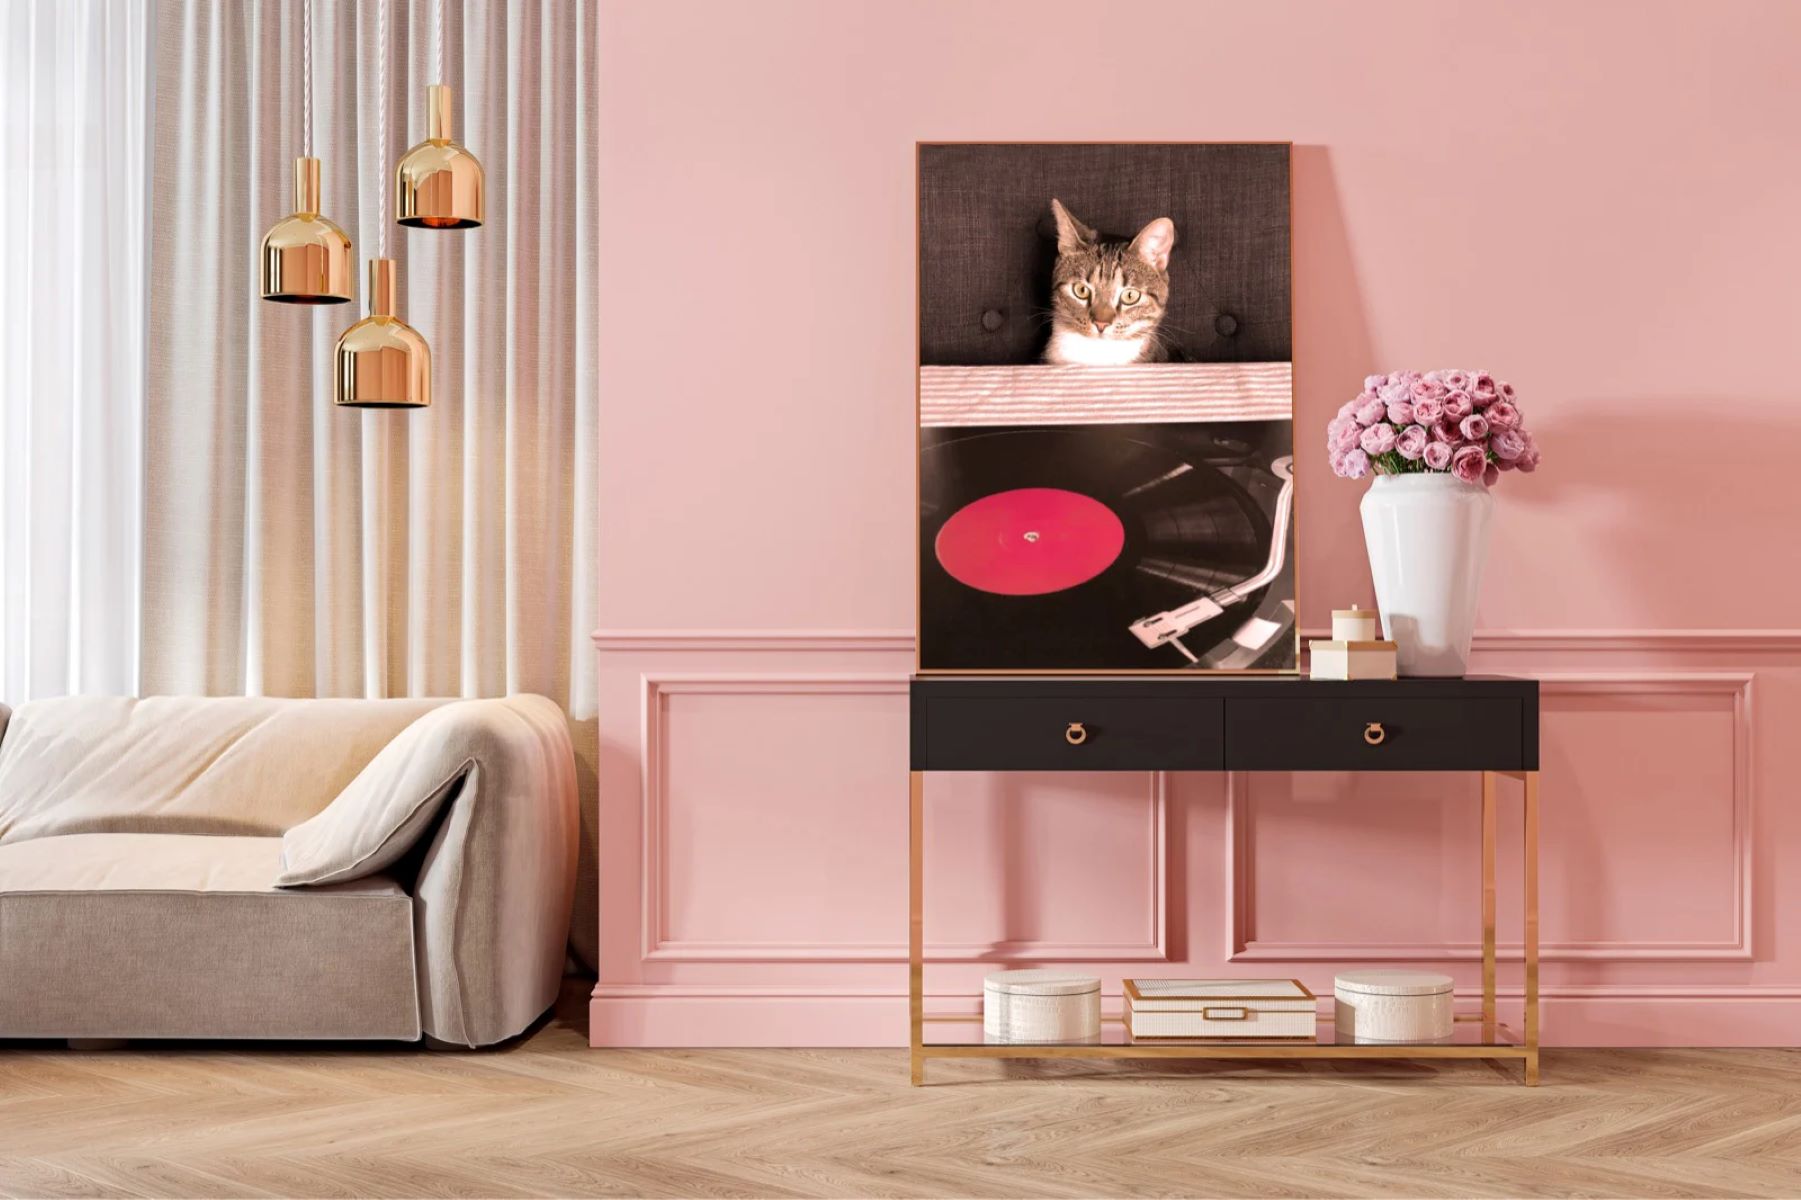 The Surprising Color Combination You Need To Try: Brown And Bright Pink